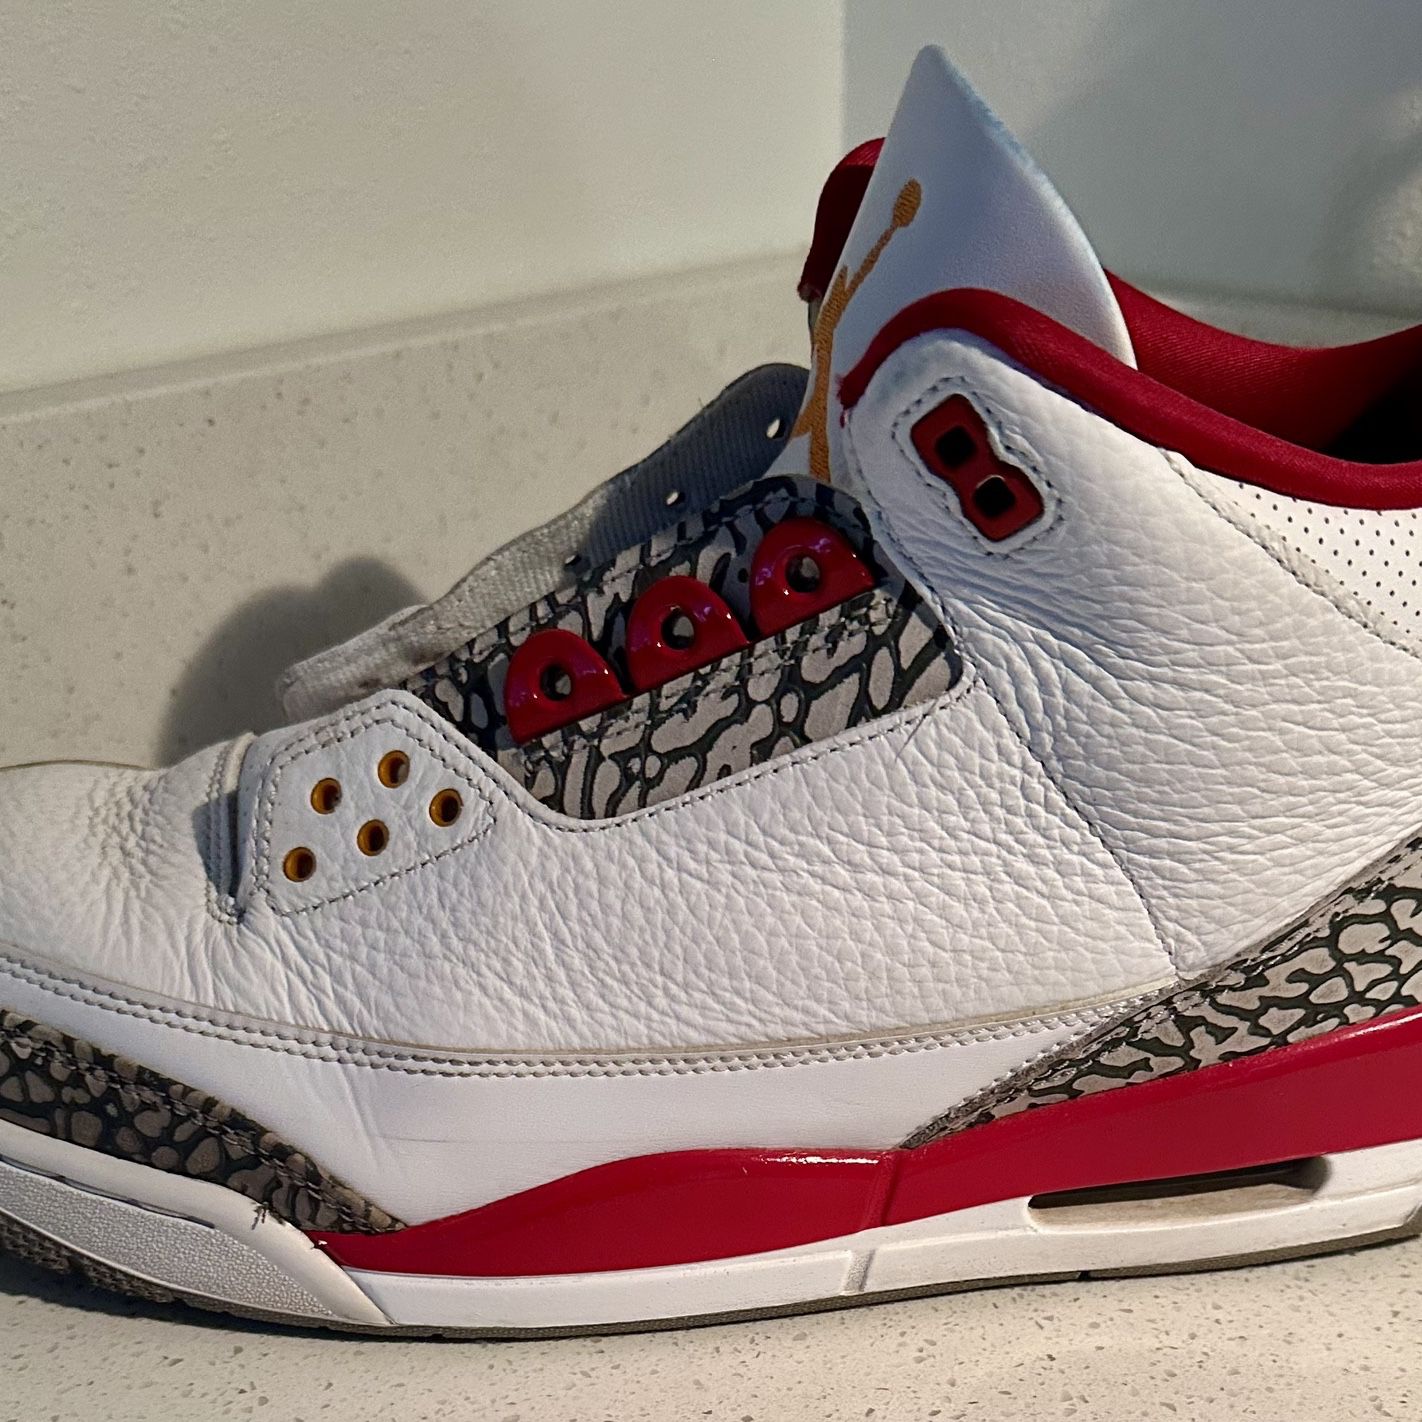 Nike Air Jordan Retro 3 Cardinal Red NEED TO SELL TODAY MAKE An Offer